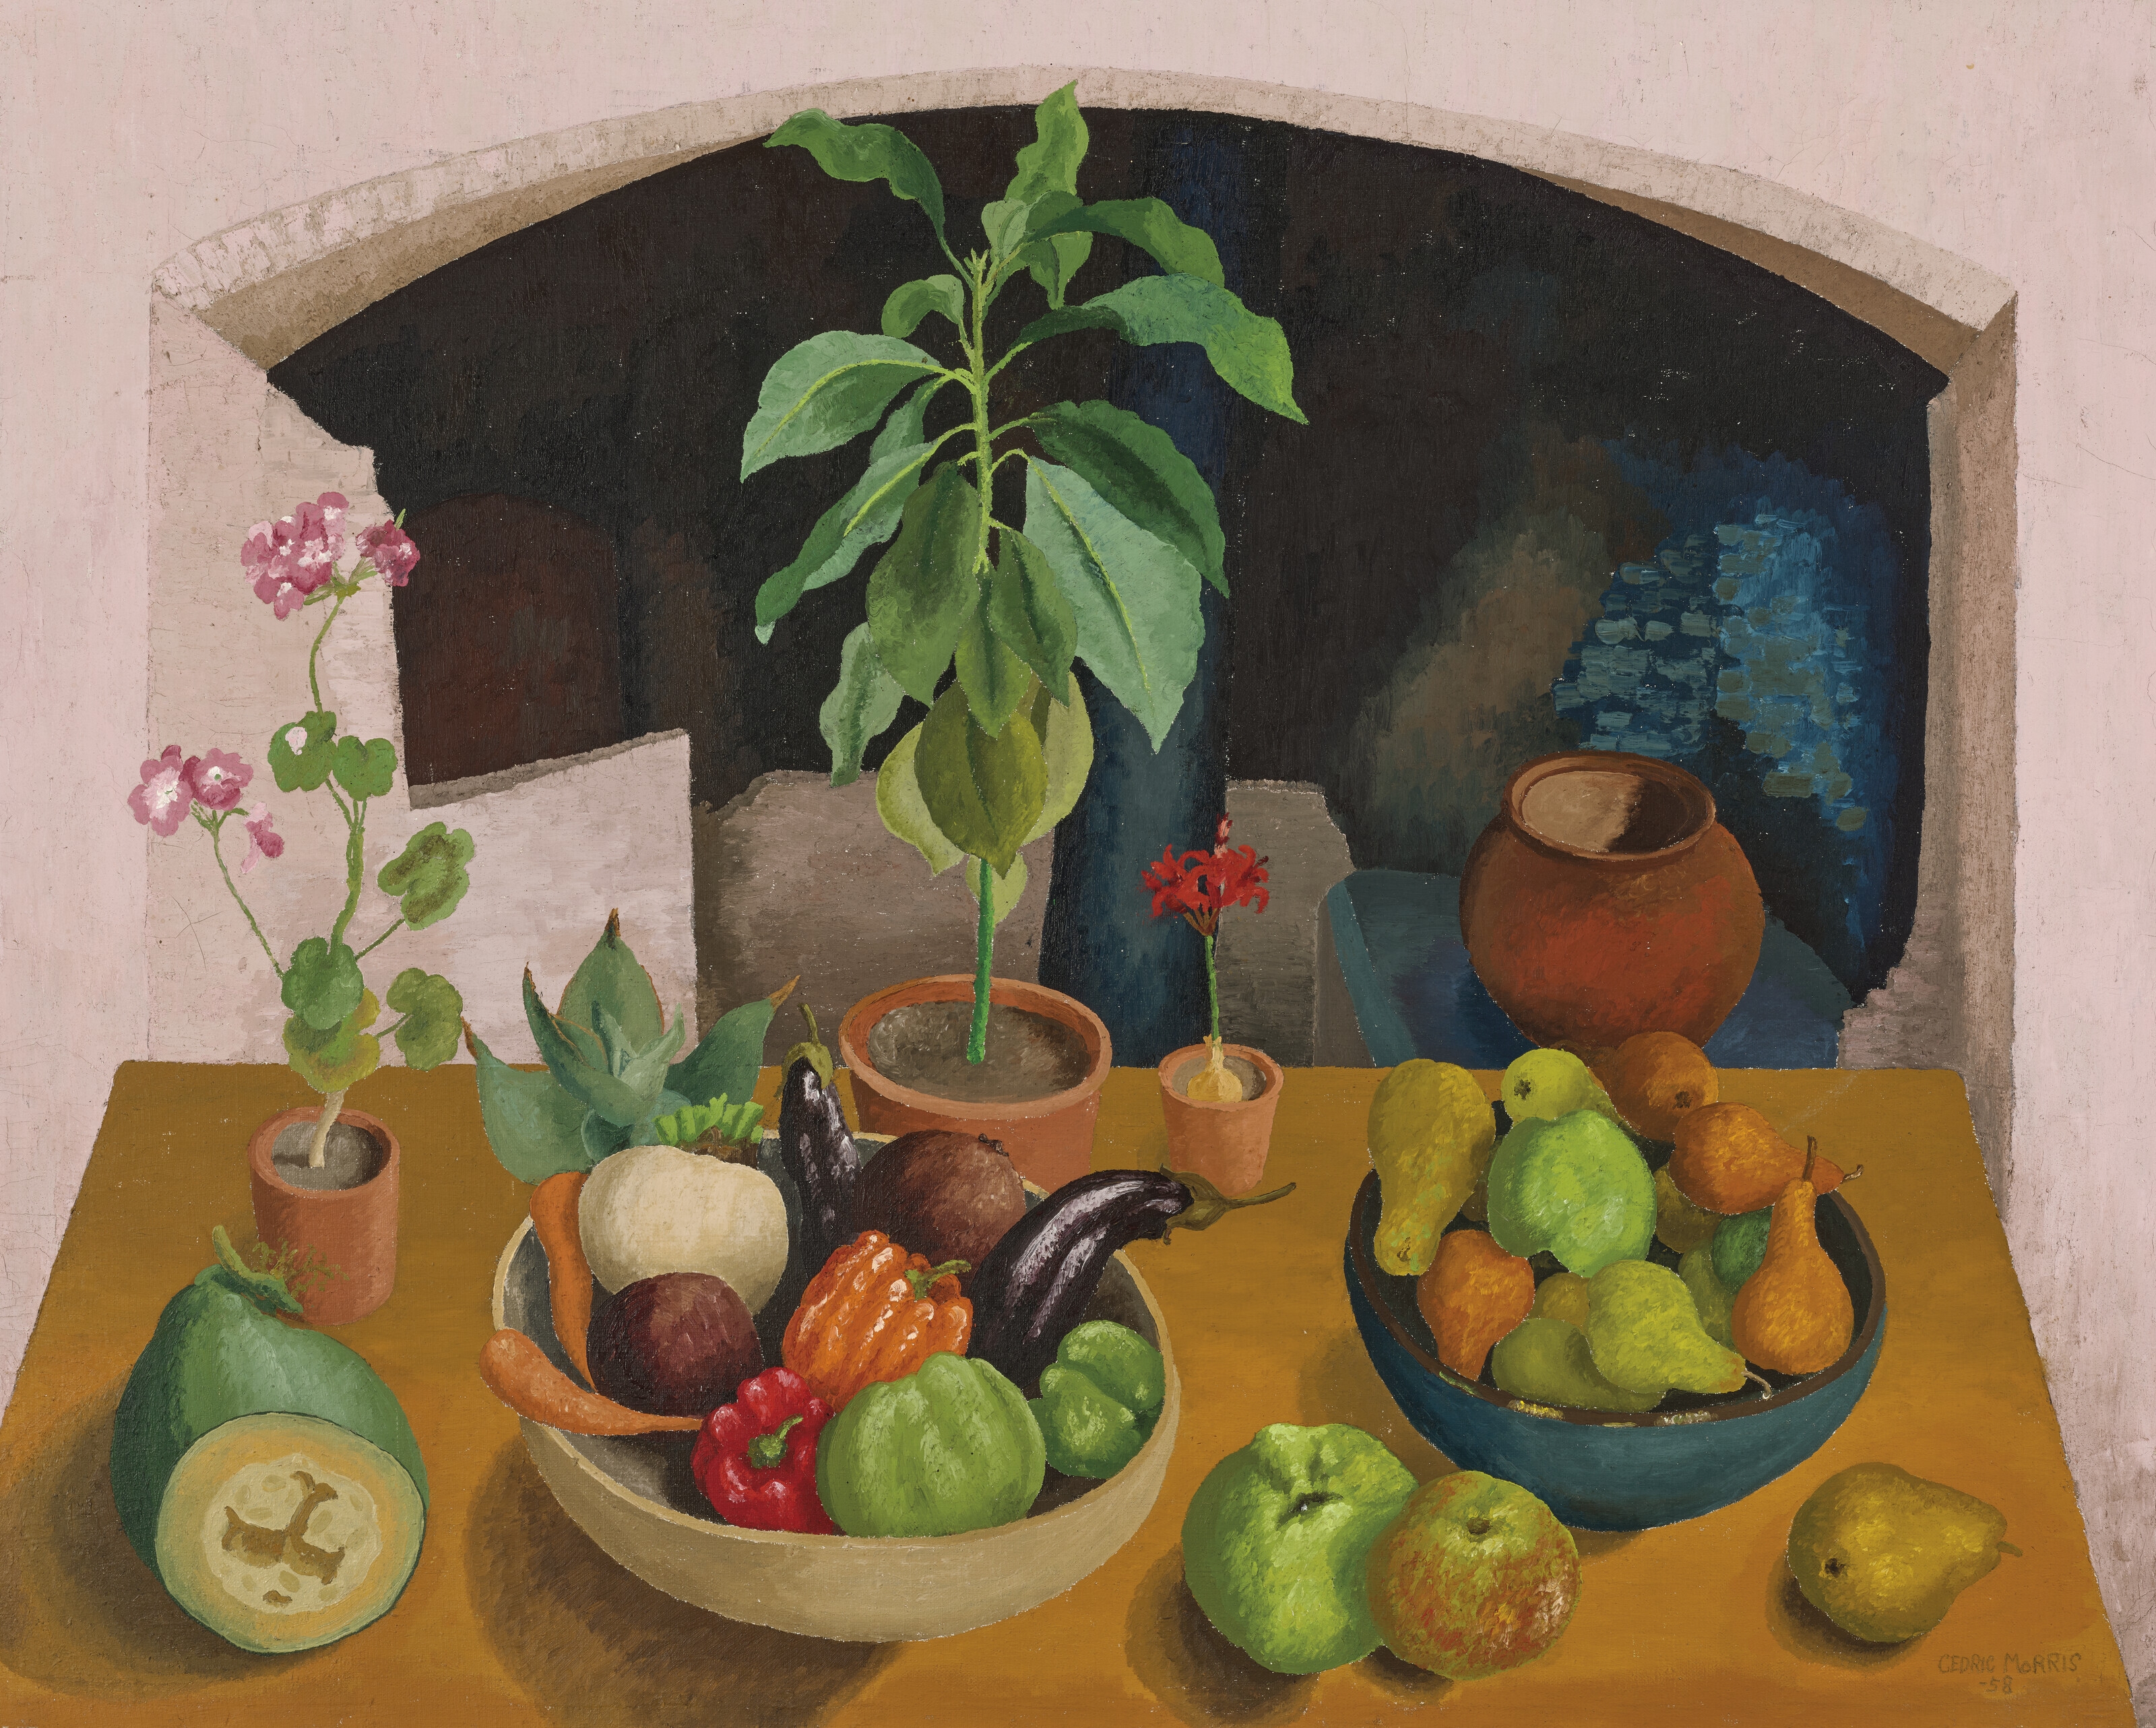 Plants and Garden Produce in an Old Kitchen - Sir Cedric Morris